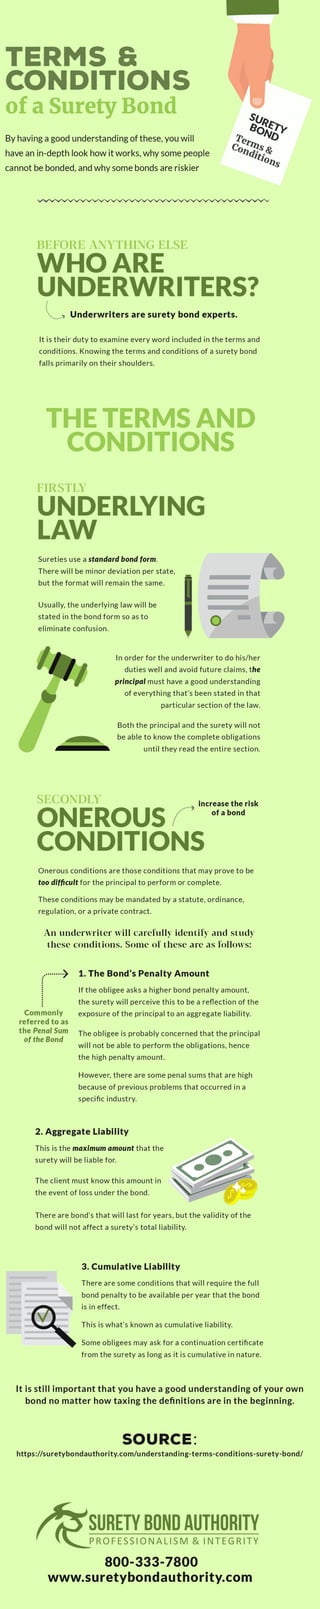 Understanding the Terms and Conditions of a Surety Bond